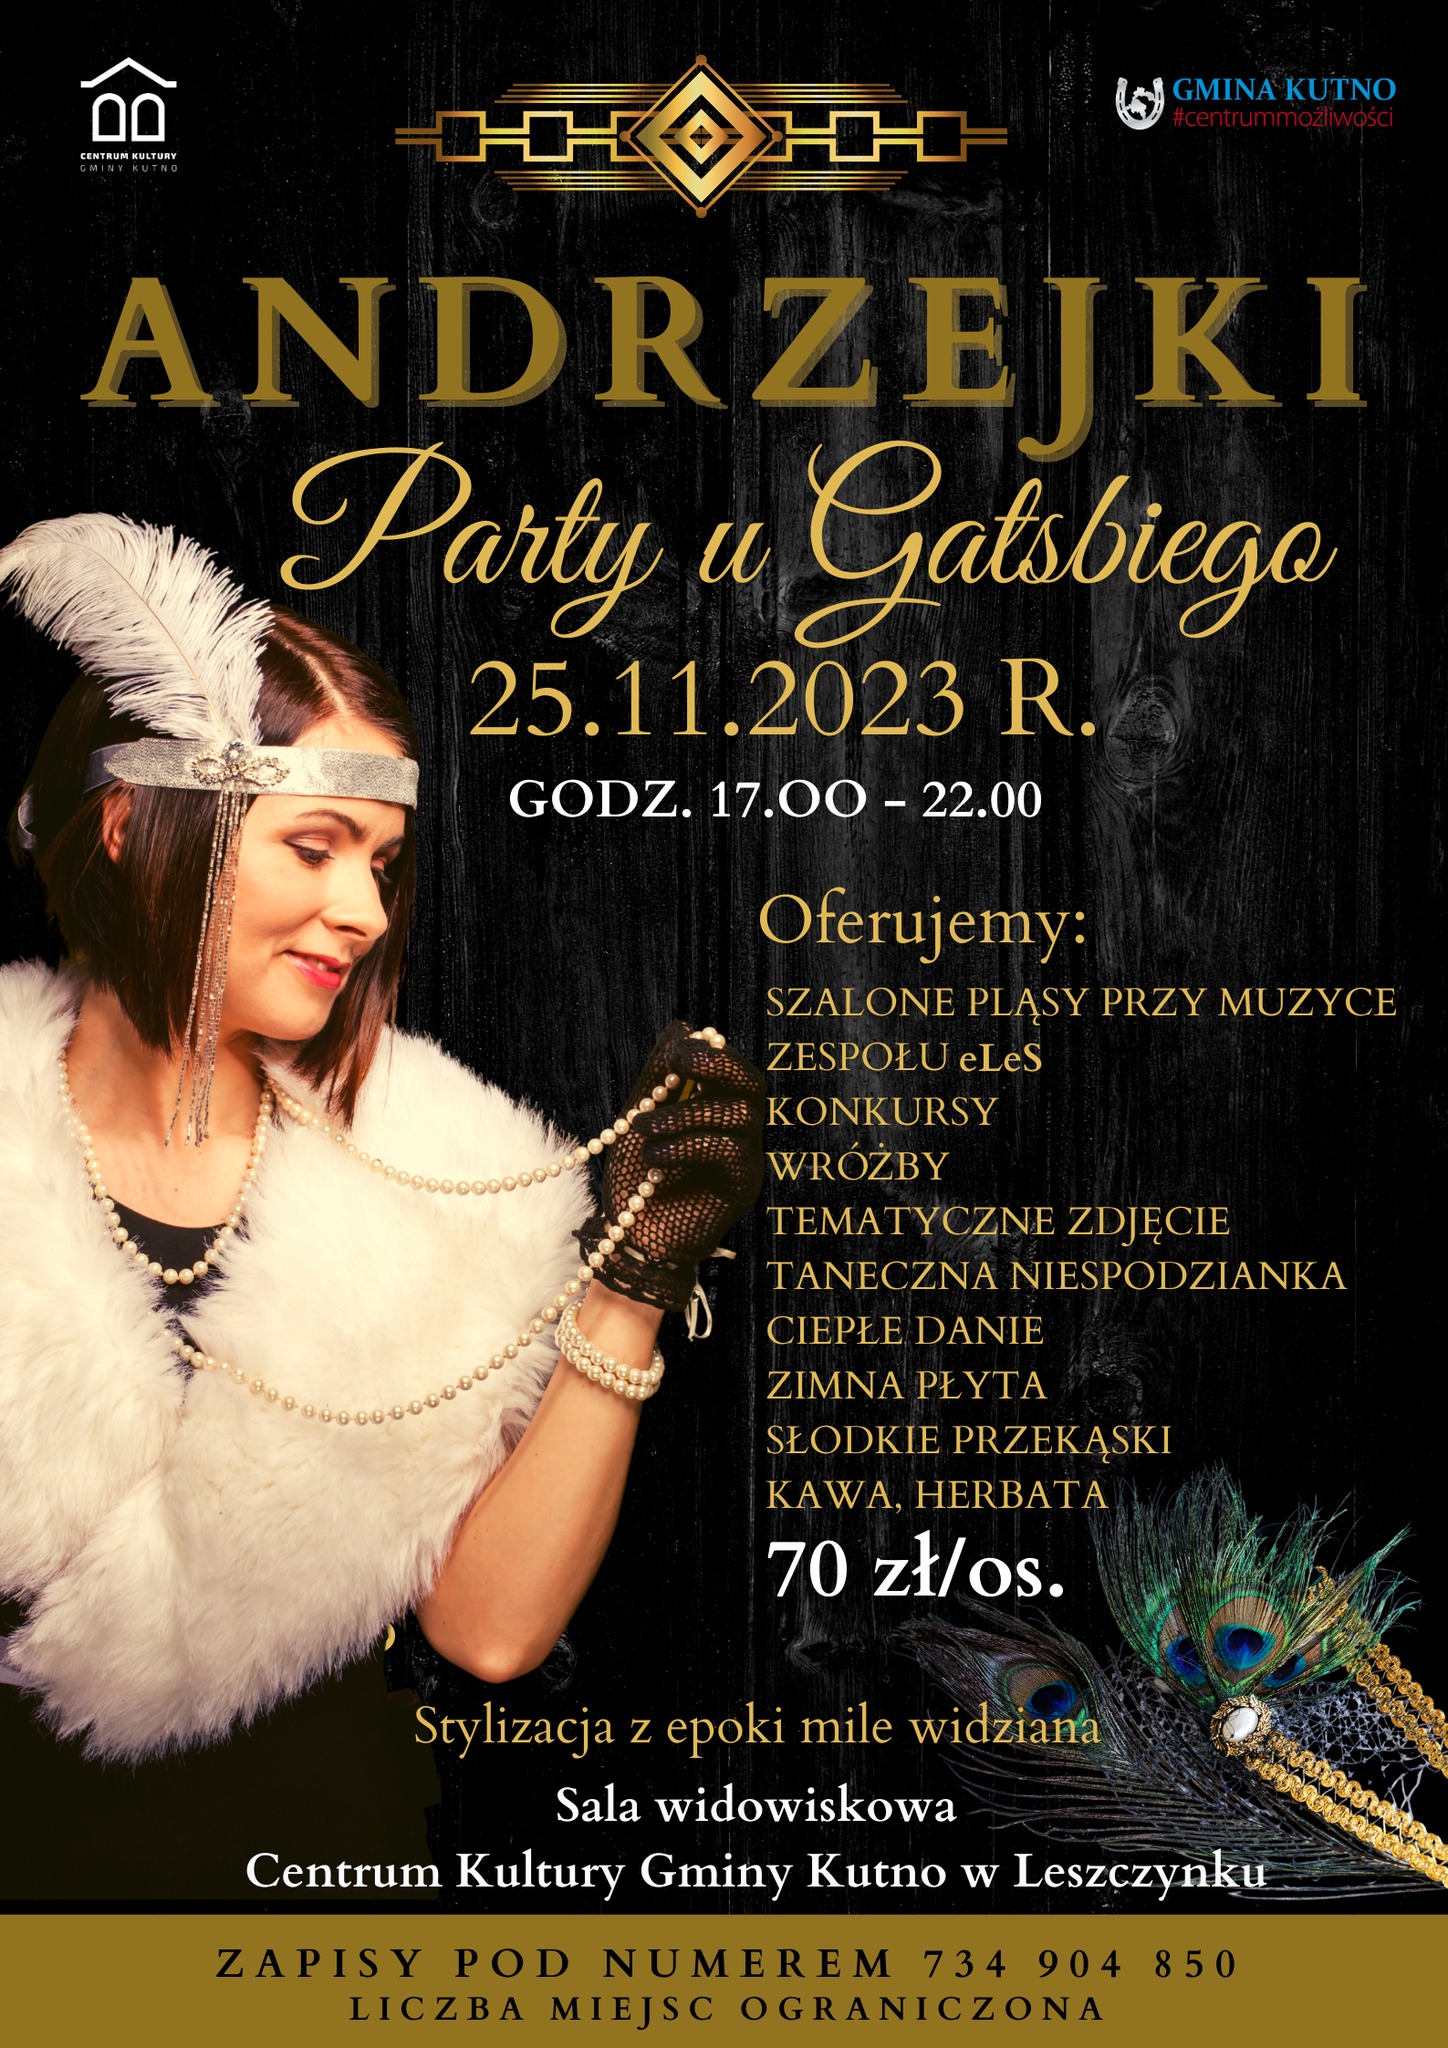 Party 2